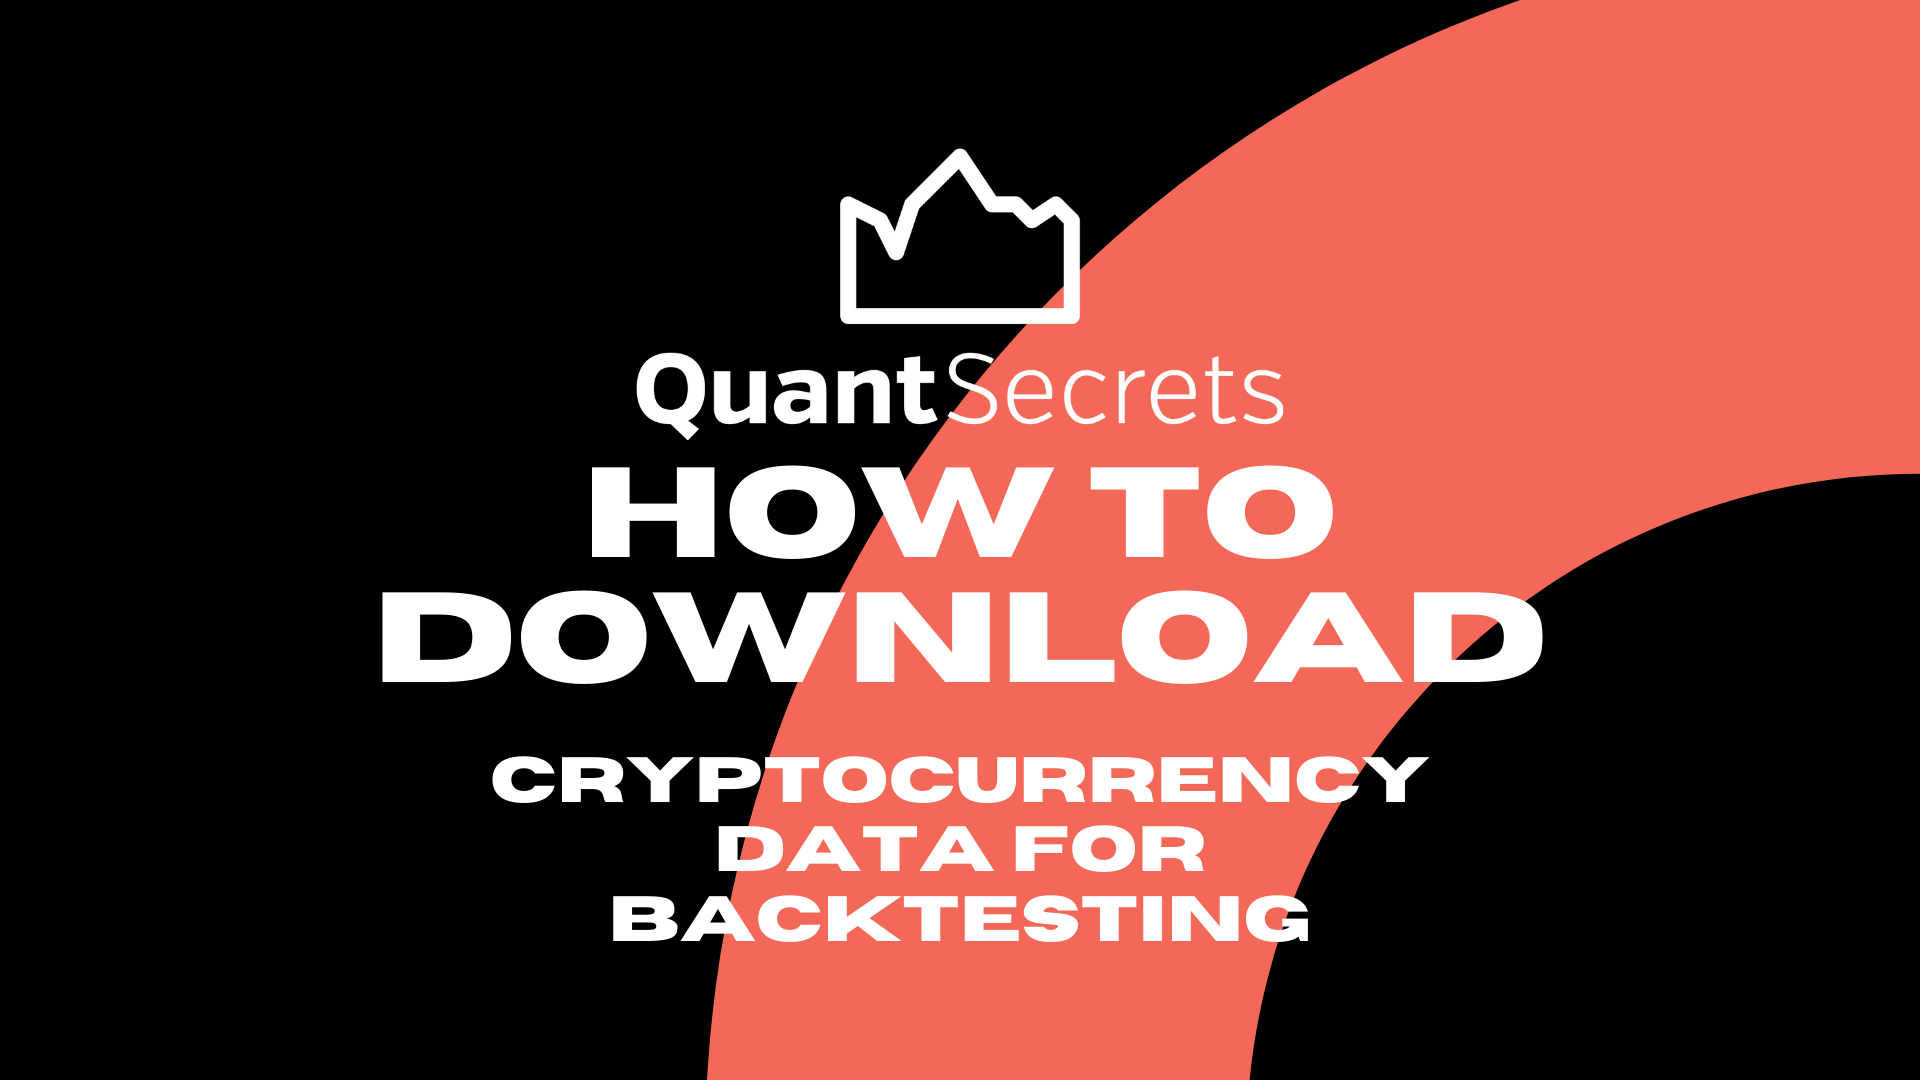 download cryptocurrency data as pkl